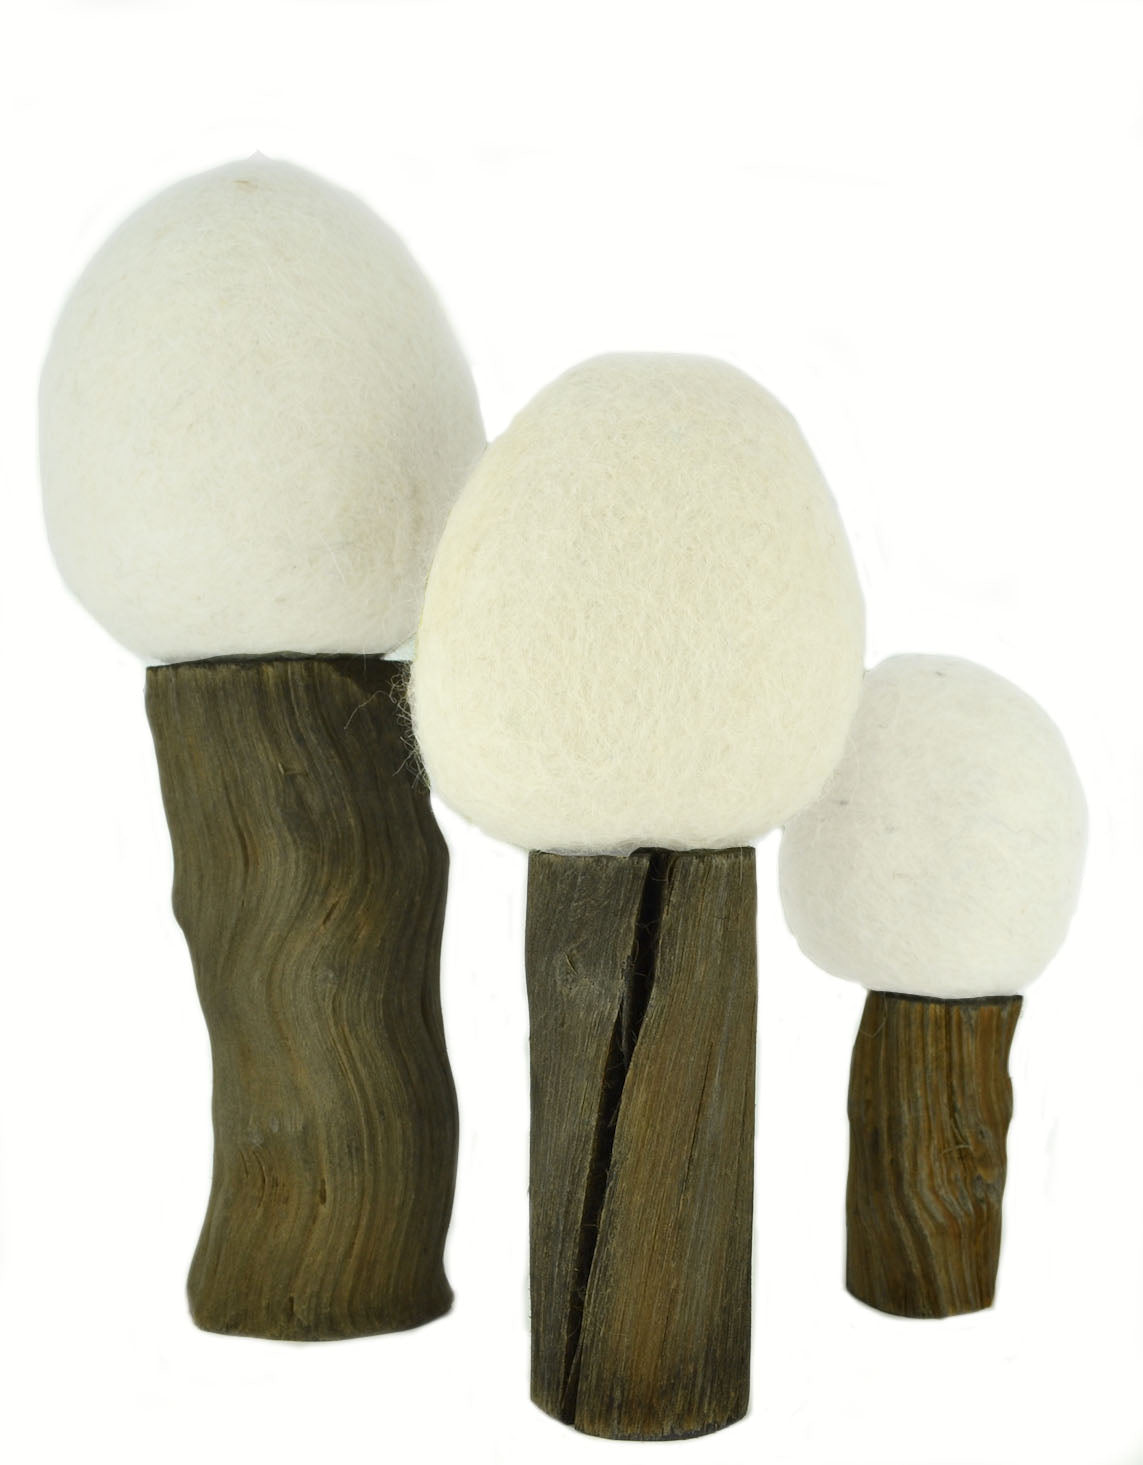 Papoose - Earth Winter Trees Set - 3 Piece